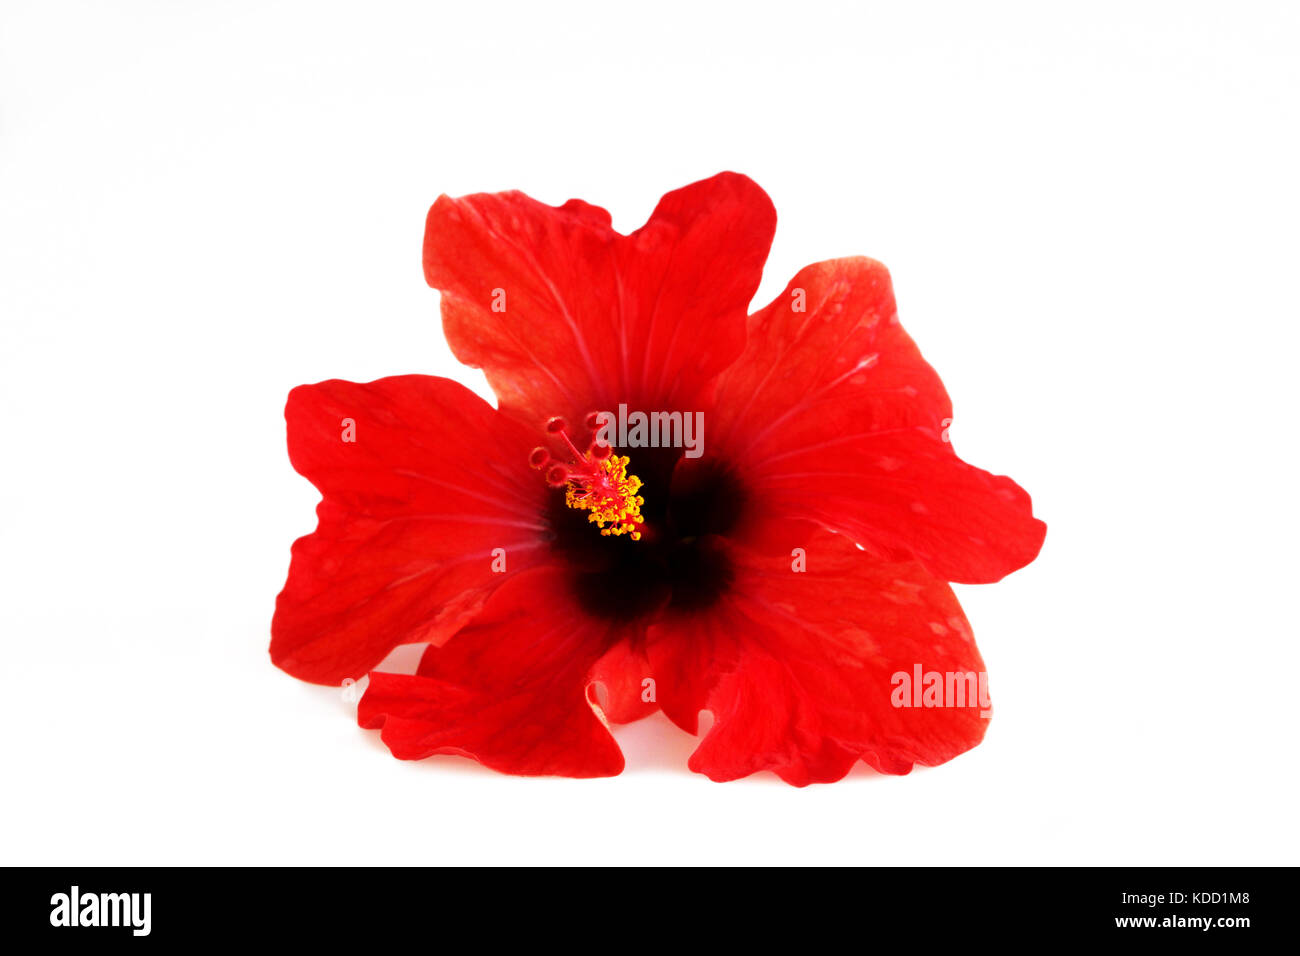 Red flower hibiscus family Malvaceae on a white background. Isolated. Stock Photo